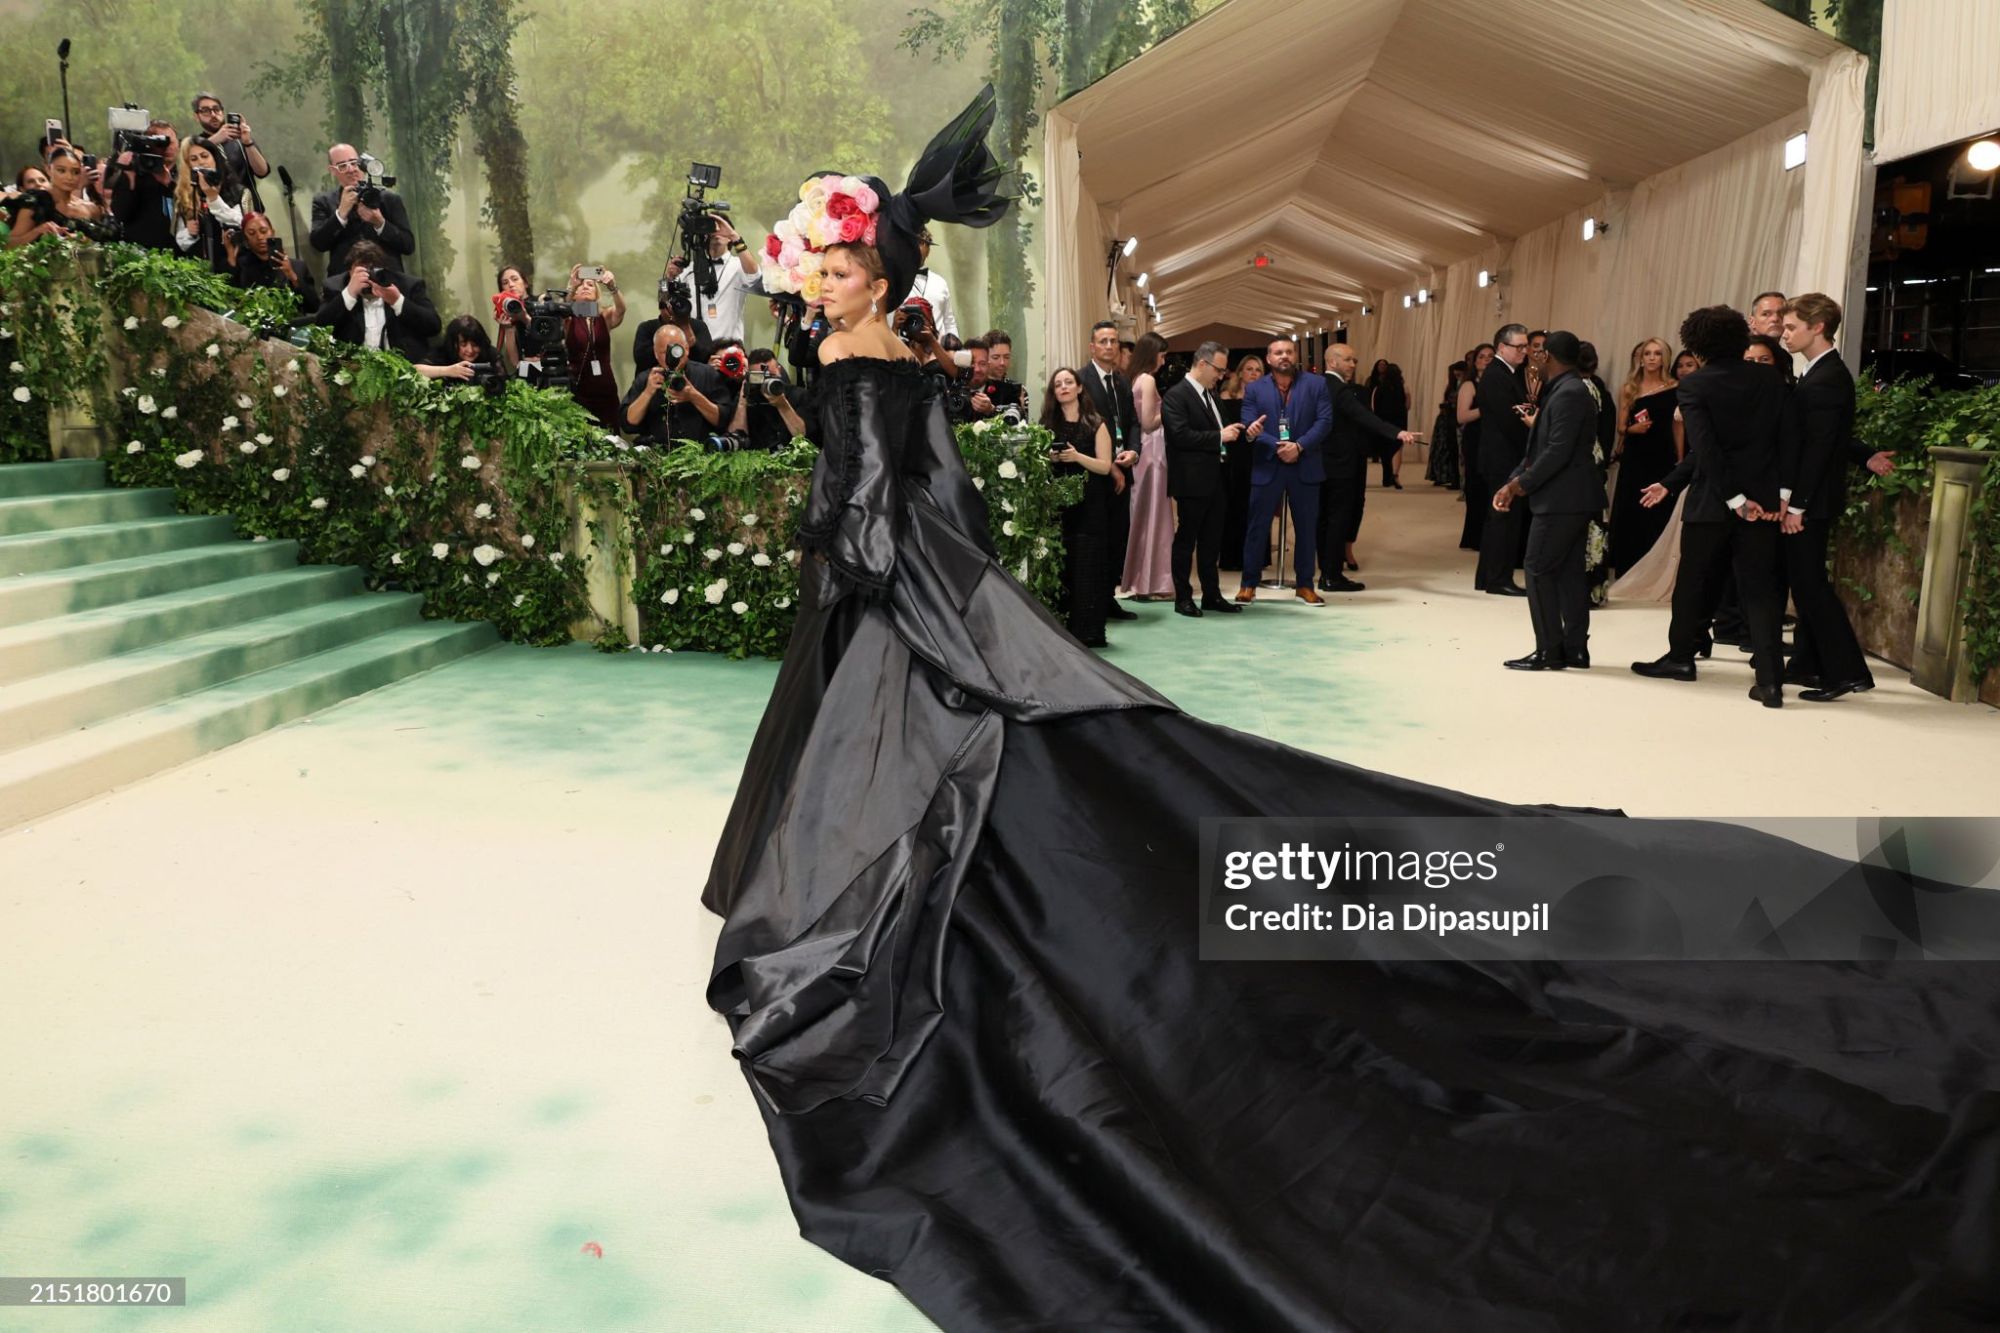 gettyimages-2151801670-2048x2048.jpg